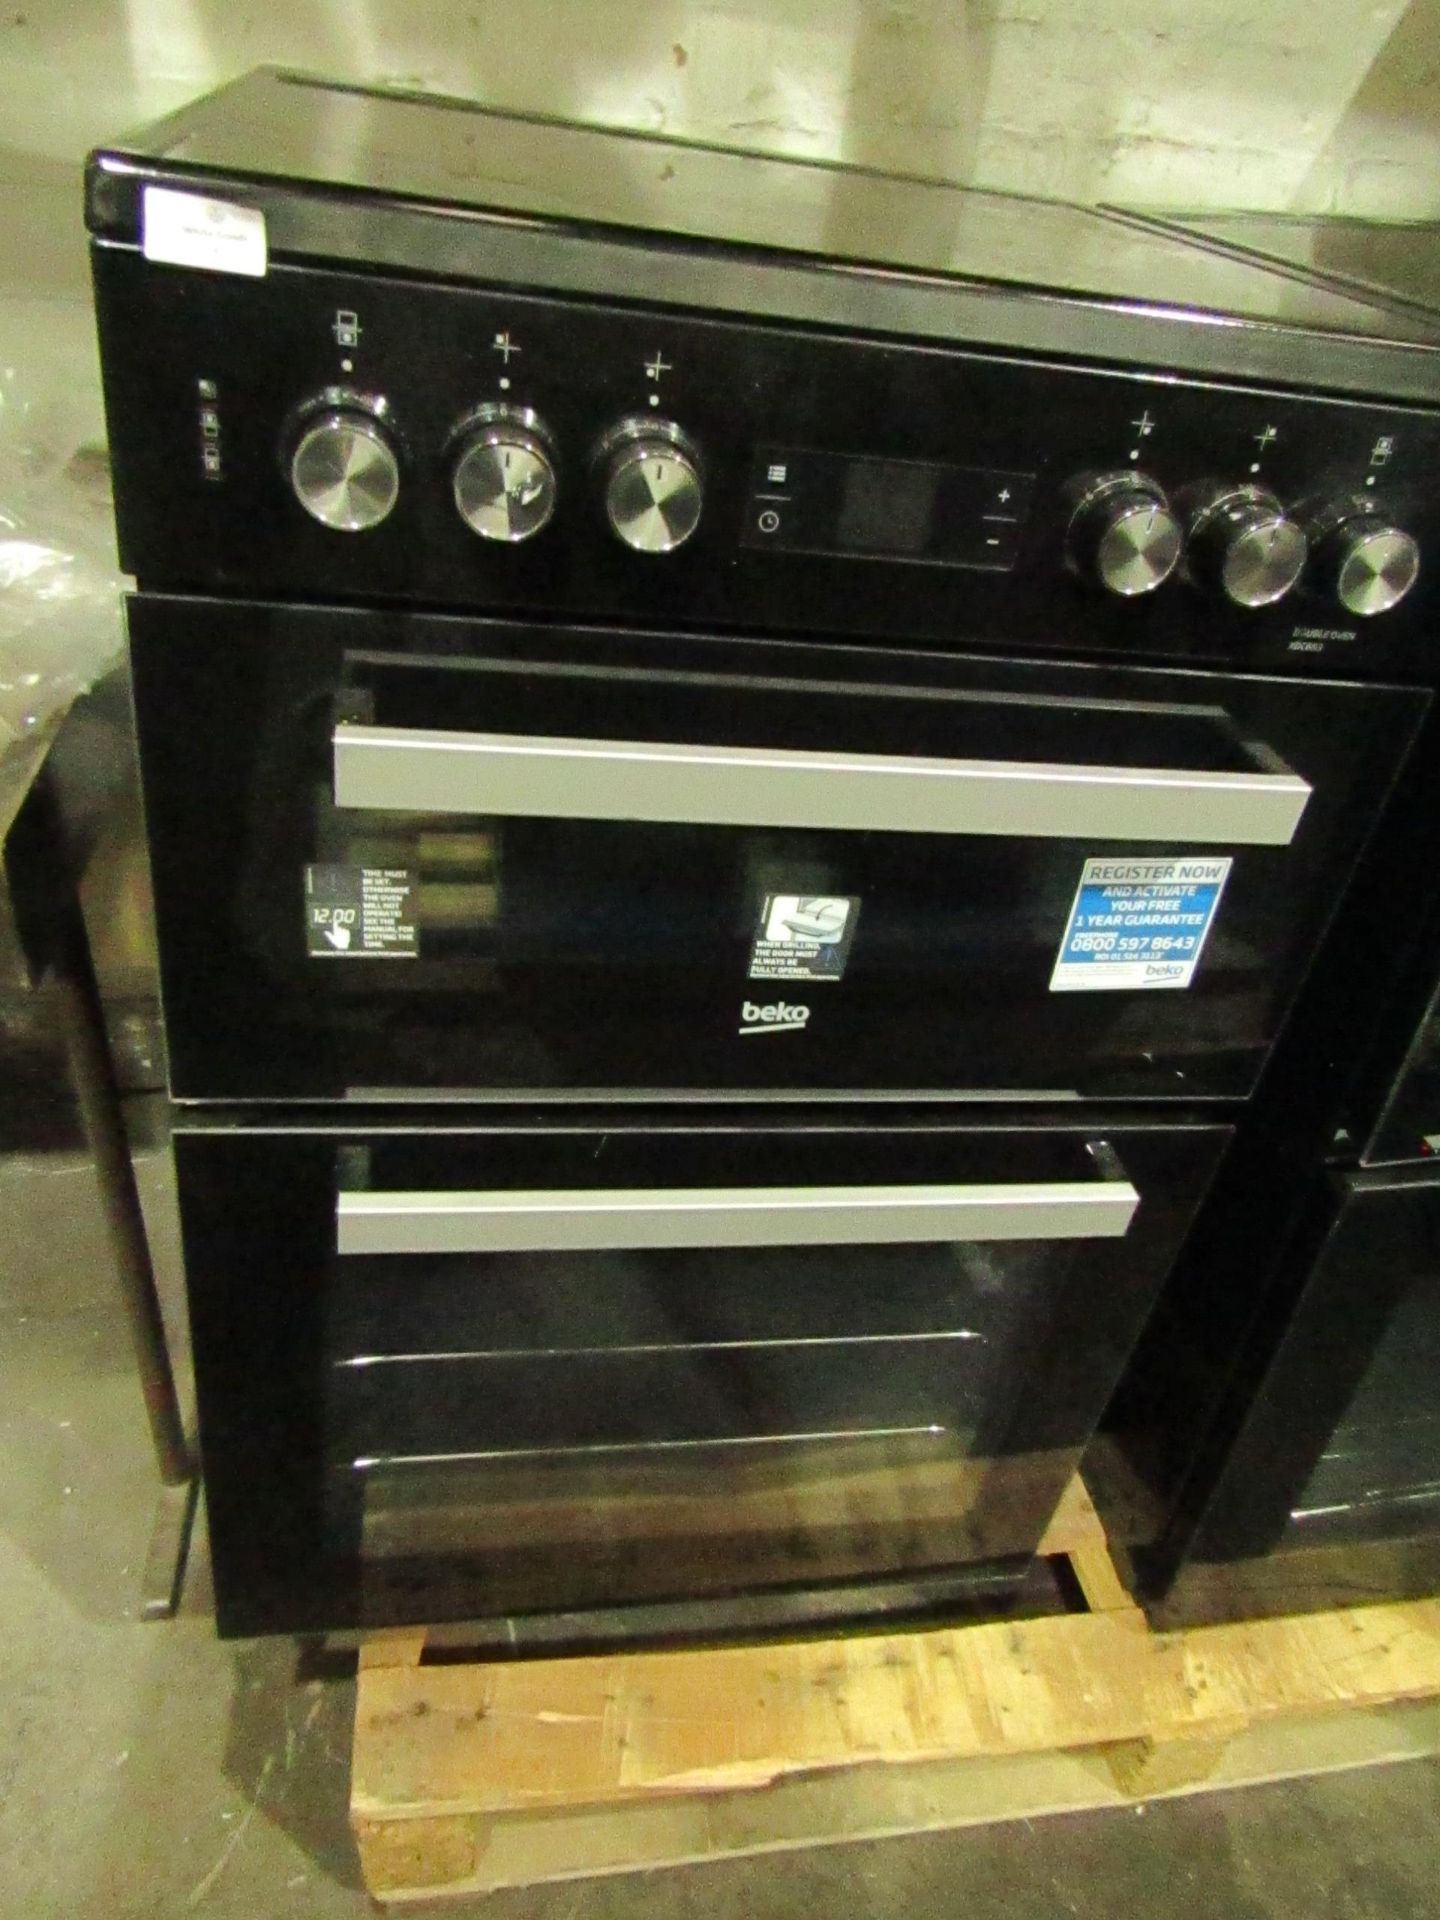 BEKO 60 cm Electric Ceramic Cooker Black & Silver XDC653K RRP ô?389.00 - This item looks to be in